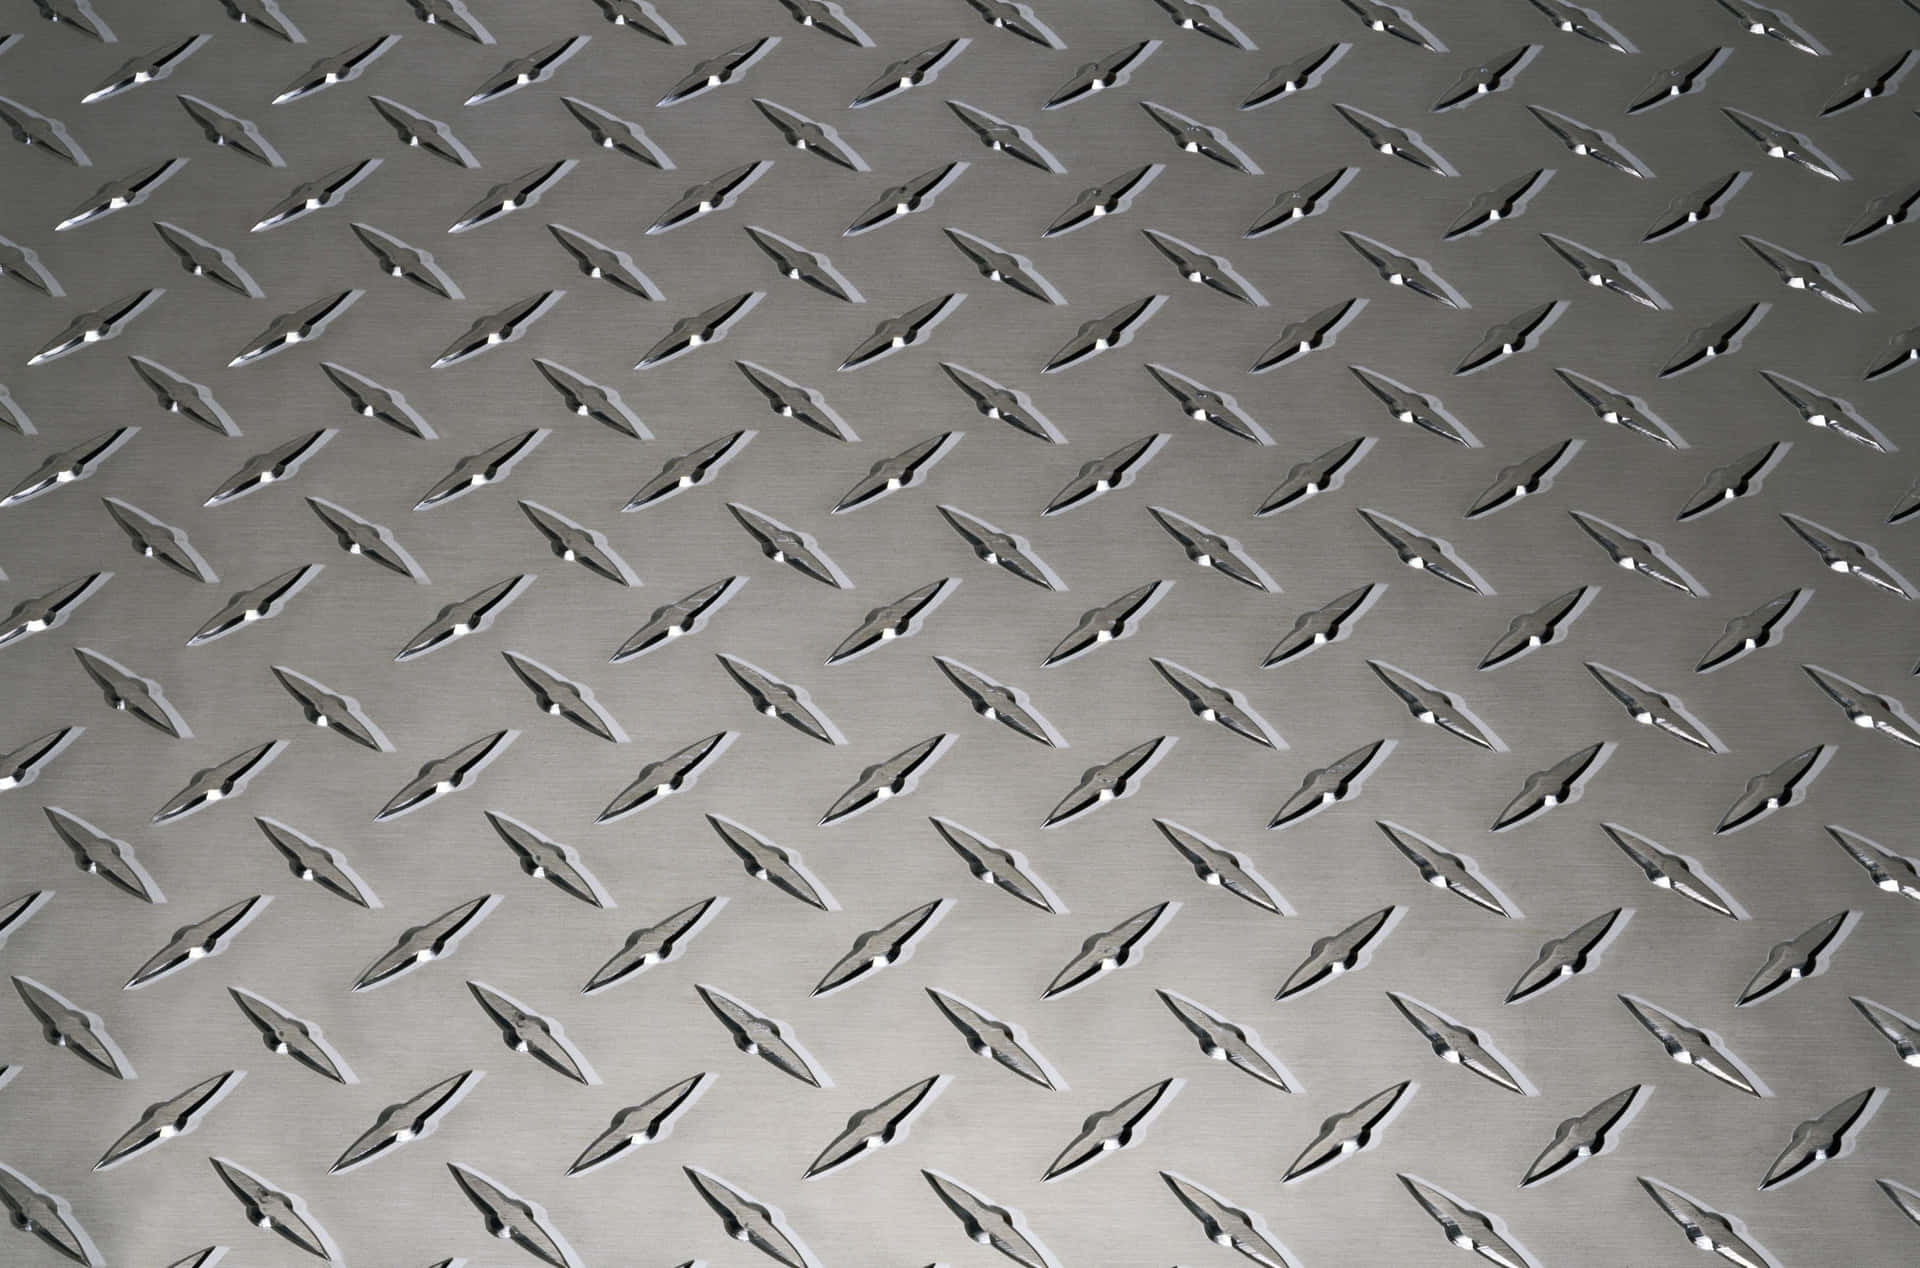 Realistic Diamond Plate Metal Texture used as a Background